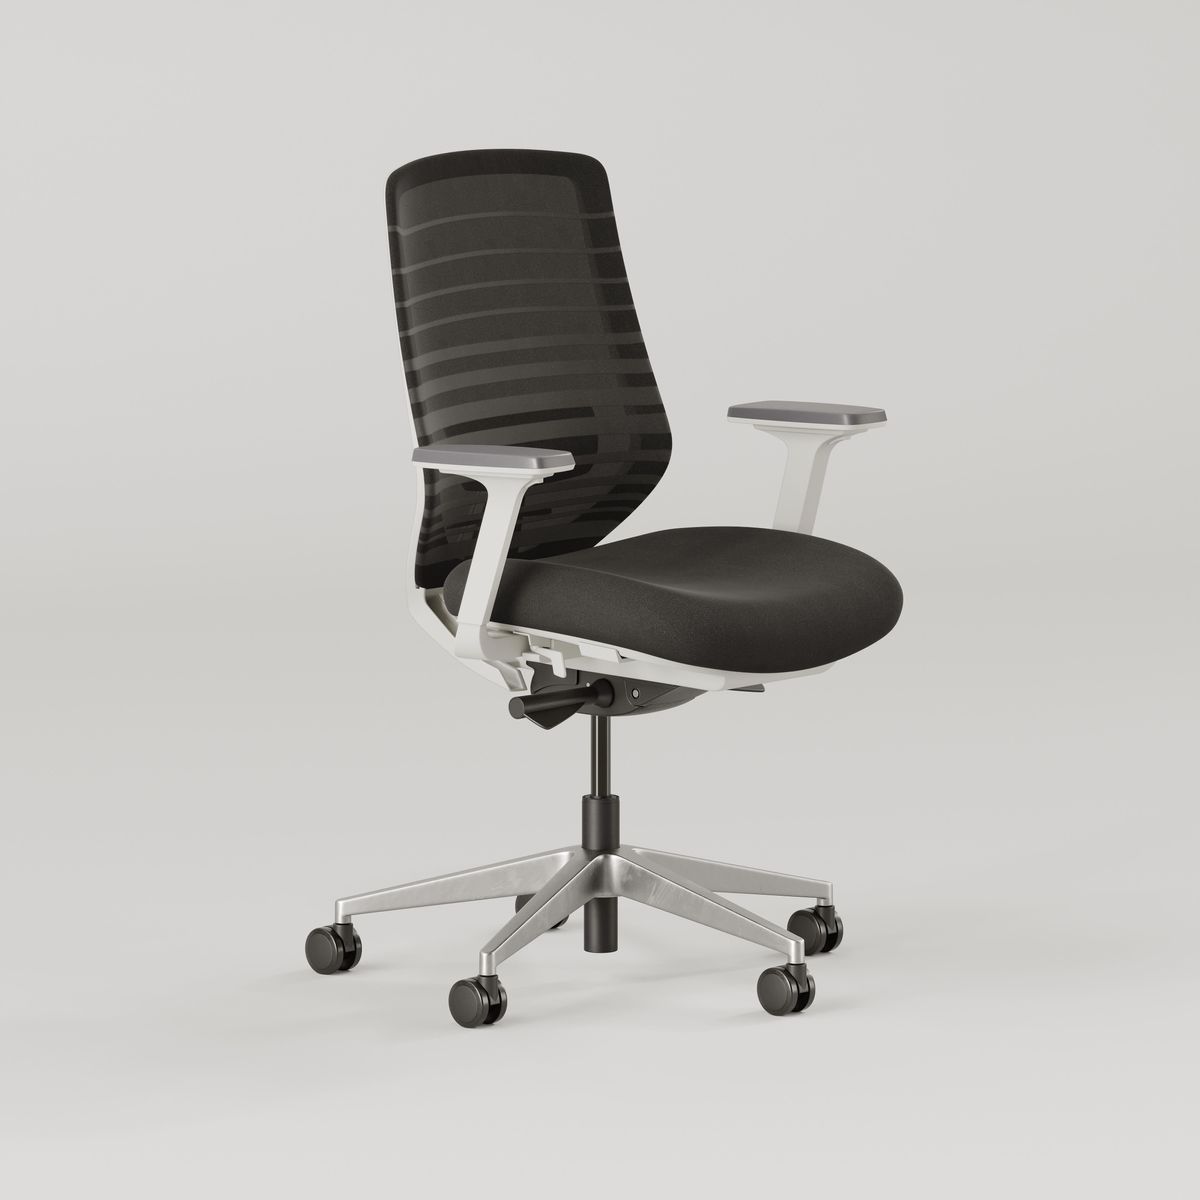 18 Best Ergonomic Office Chairs 2021, What Is A Chair Without Arms Called